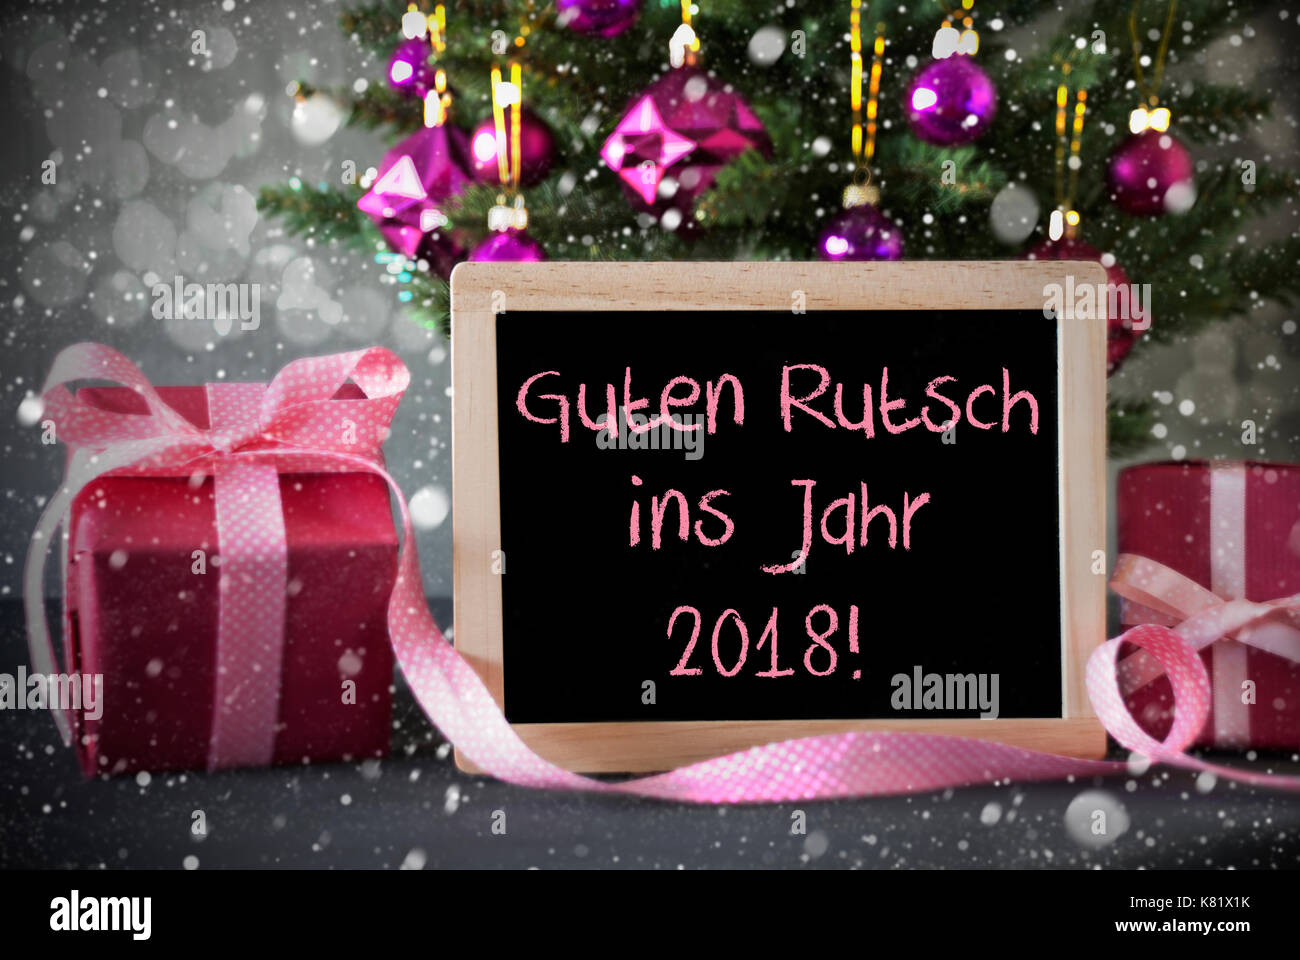 Tree, Gifts, Snowflakes, Bokeh, Guten Rutsch 2018 Means New Year Stock Photo